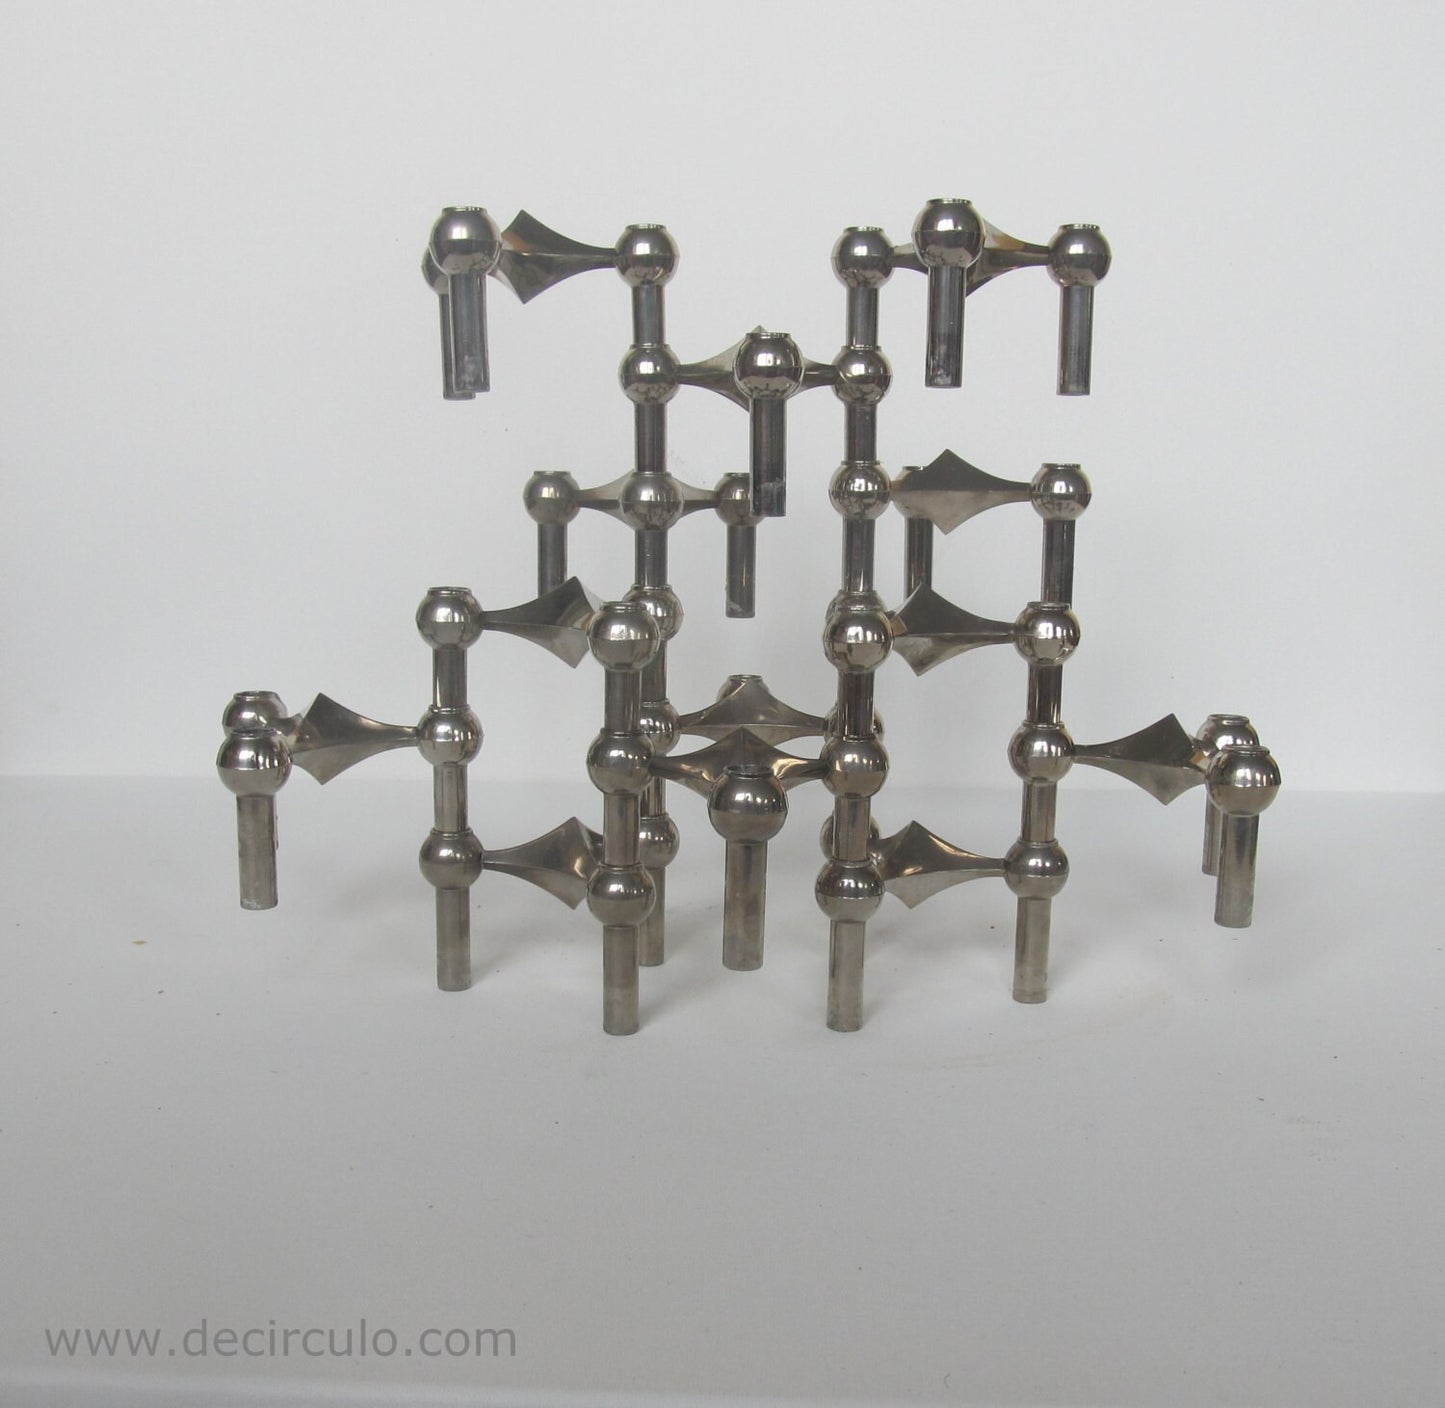 12 Candle holders S22 designed by Ceasar Stoffi and Fritz Nagel and manufactured by BMF Set of 12 & stackable